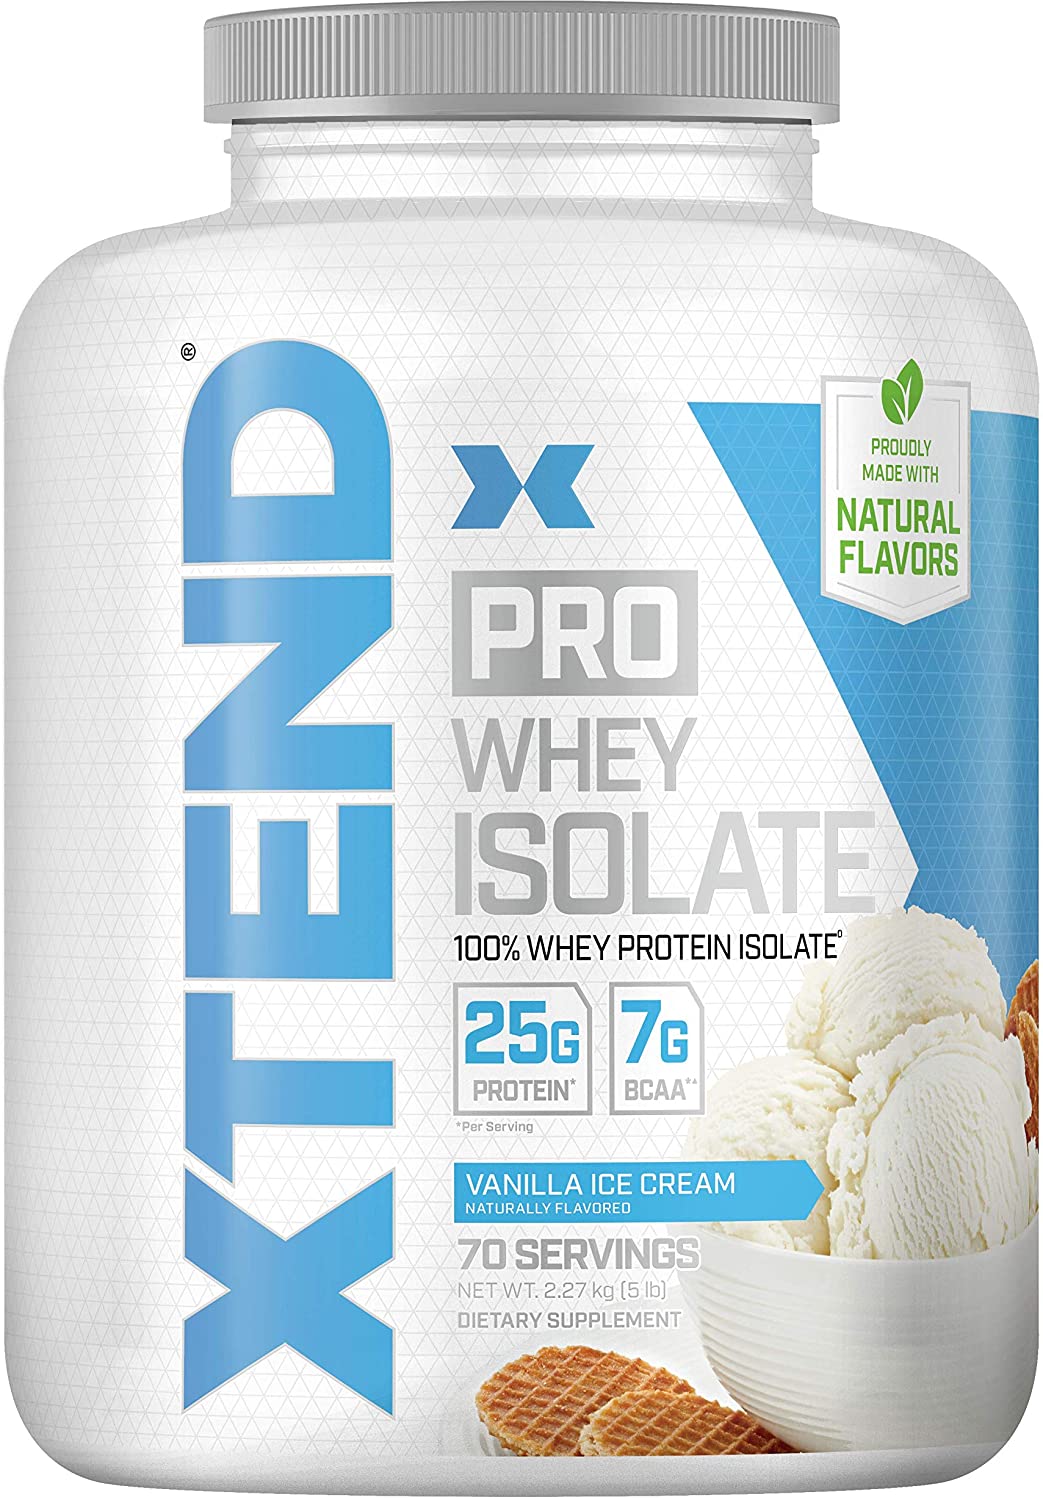 Amazon.com: XTEND Pro Protein Powder Vanilla Ice Cream | 100% Whey Protein Isolate | Keto Friendly + 7g BCAAs with Natural Flavors | Gluten Free Low Fat Post Workout Drink | 5lbs 蛋白粉